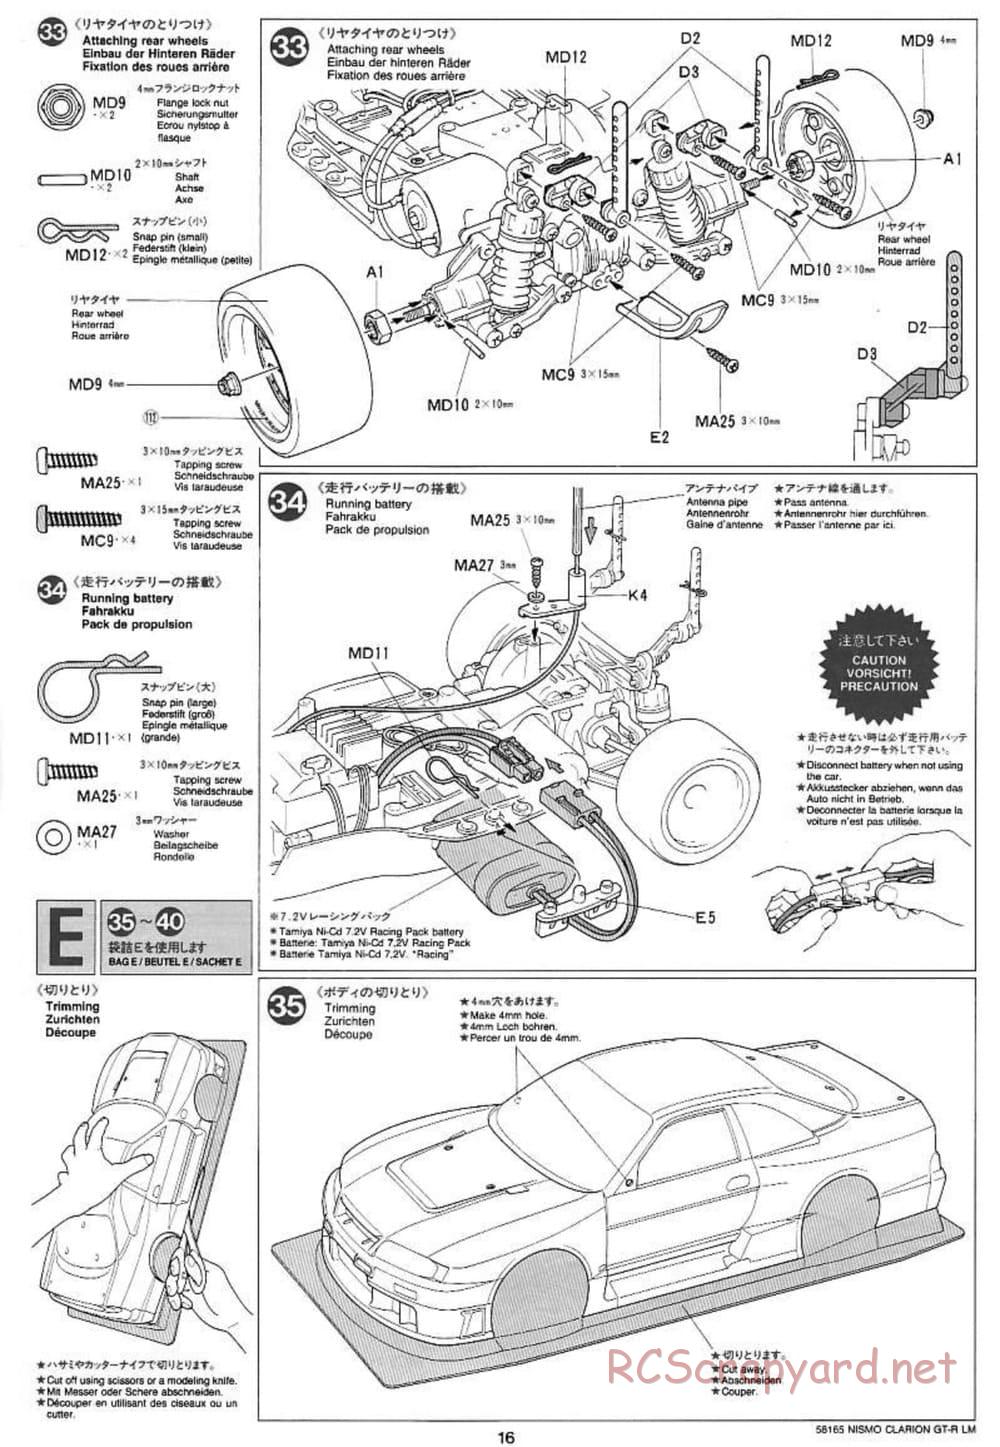 Tamiya - Nismo Clarion GT-R LM - TA-02W Chassis - Manual - Page 16